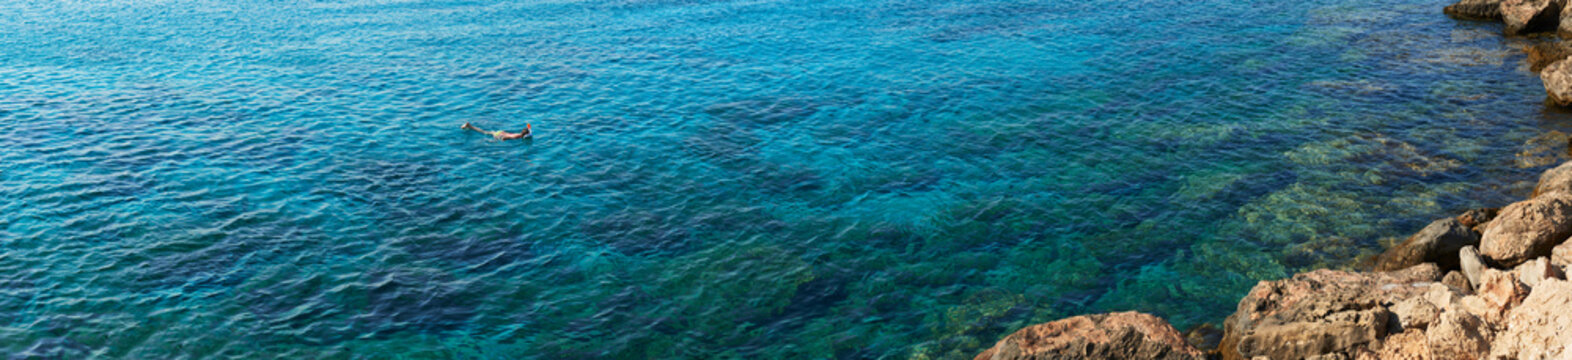 Panoramic photograph of child snorkeling in Mediterranean sea.